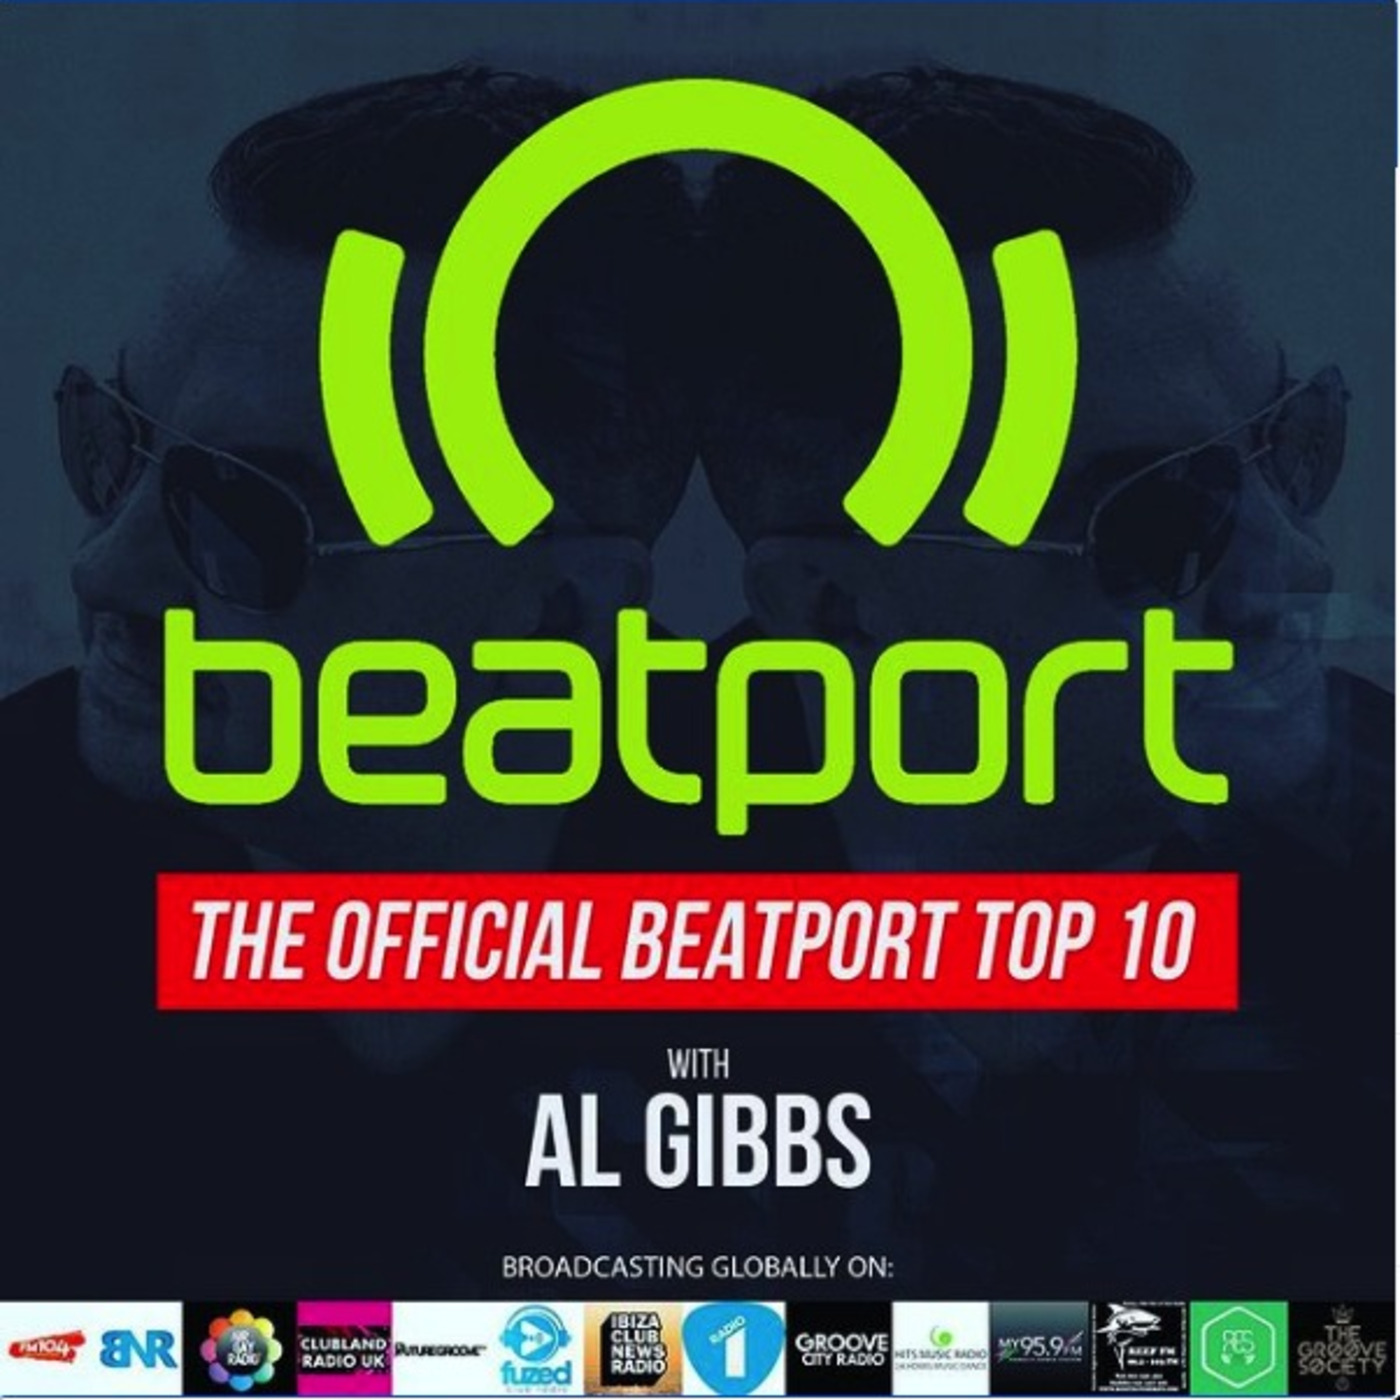 Episode 68: THE OFFICIAL BEATPORT TOP 10 WITH AL GIBBS (THE GLOBAL CHART) Week 16 2021